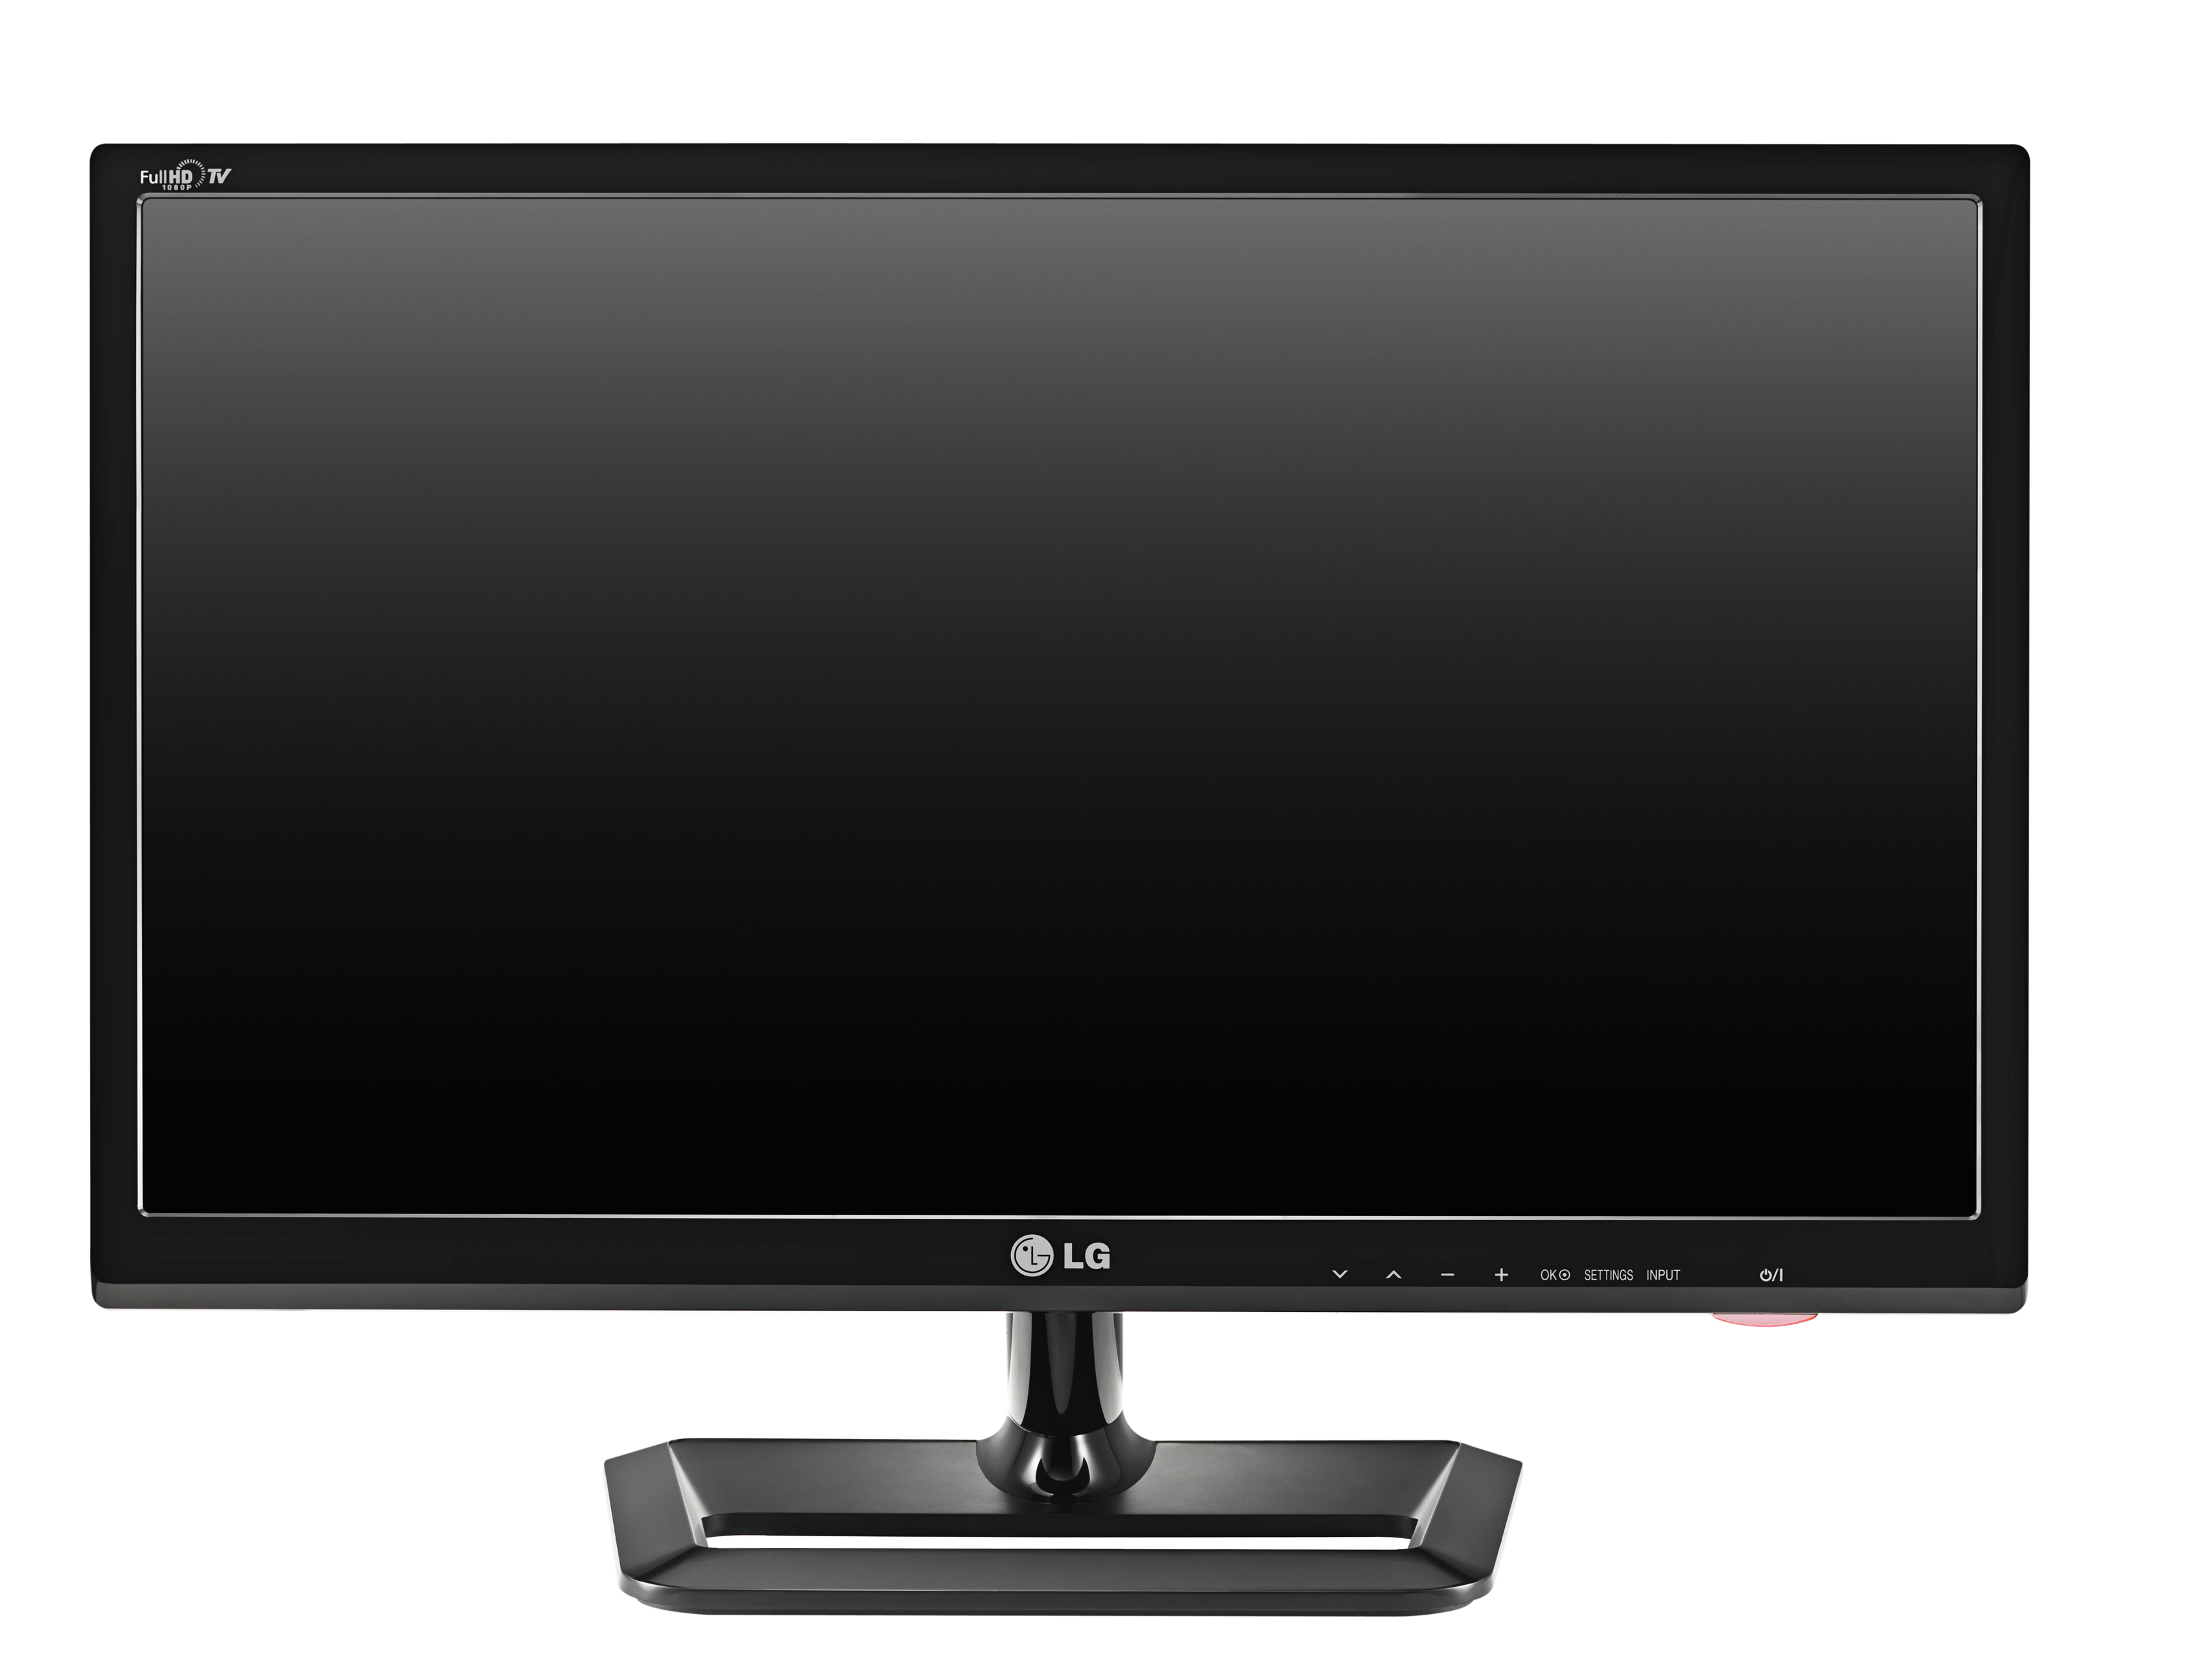 Front view of LG’s premium personal TV model DM2752